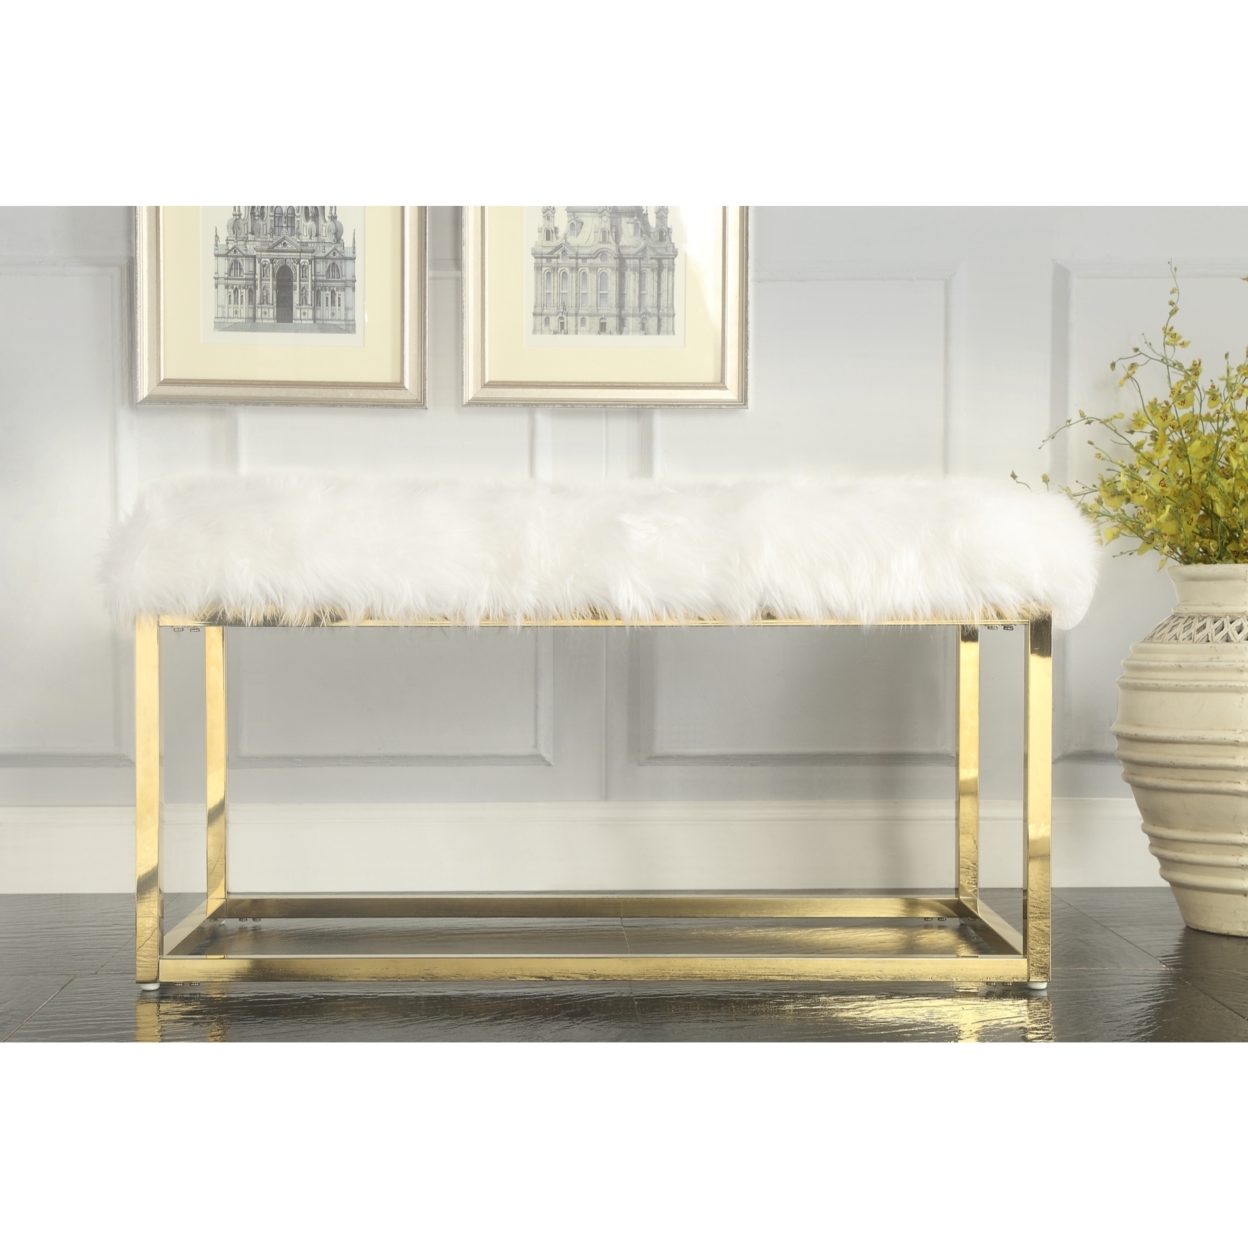 Camilla Faux Fur Bench-Chrome Frame-Ottoman-Living Room, Entryway, Bedroom-Inspired Home - White Gold